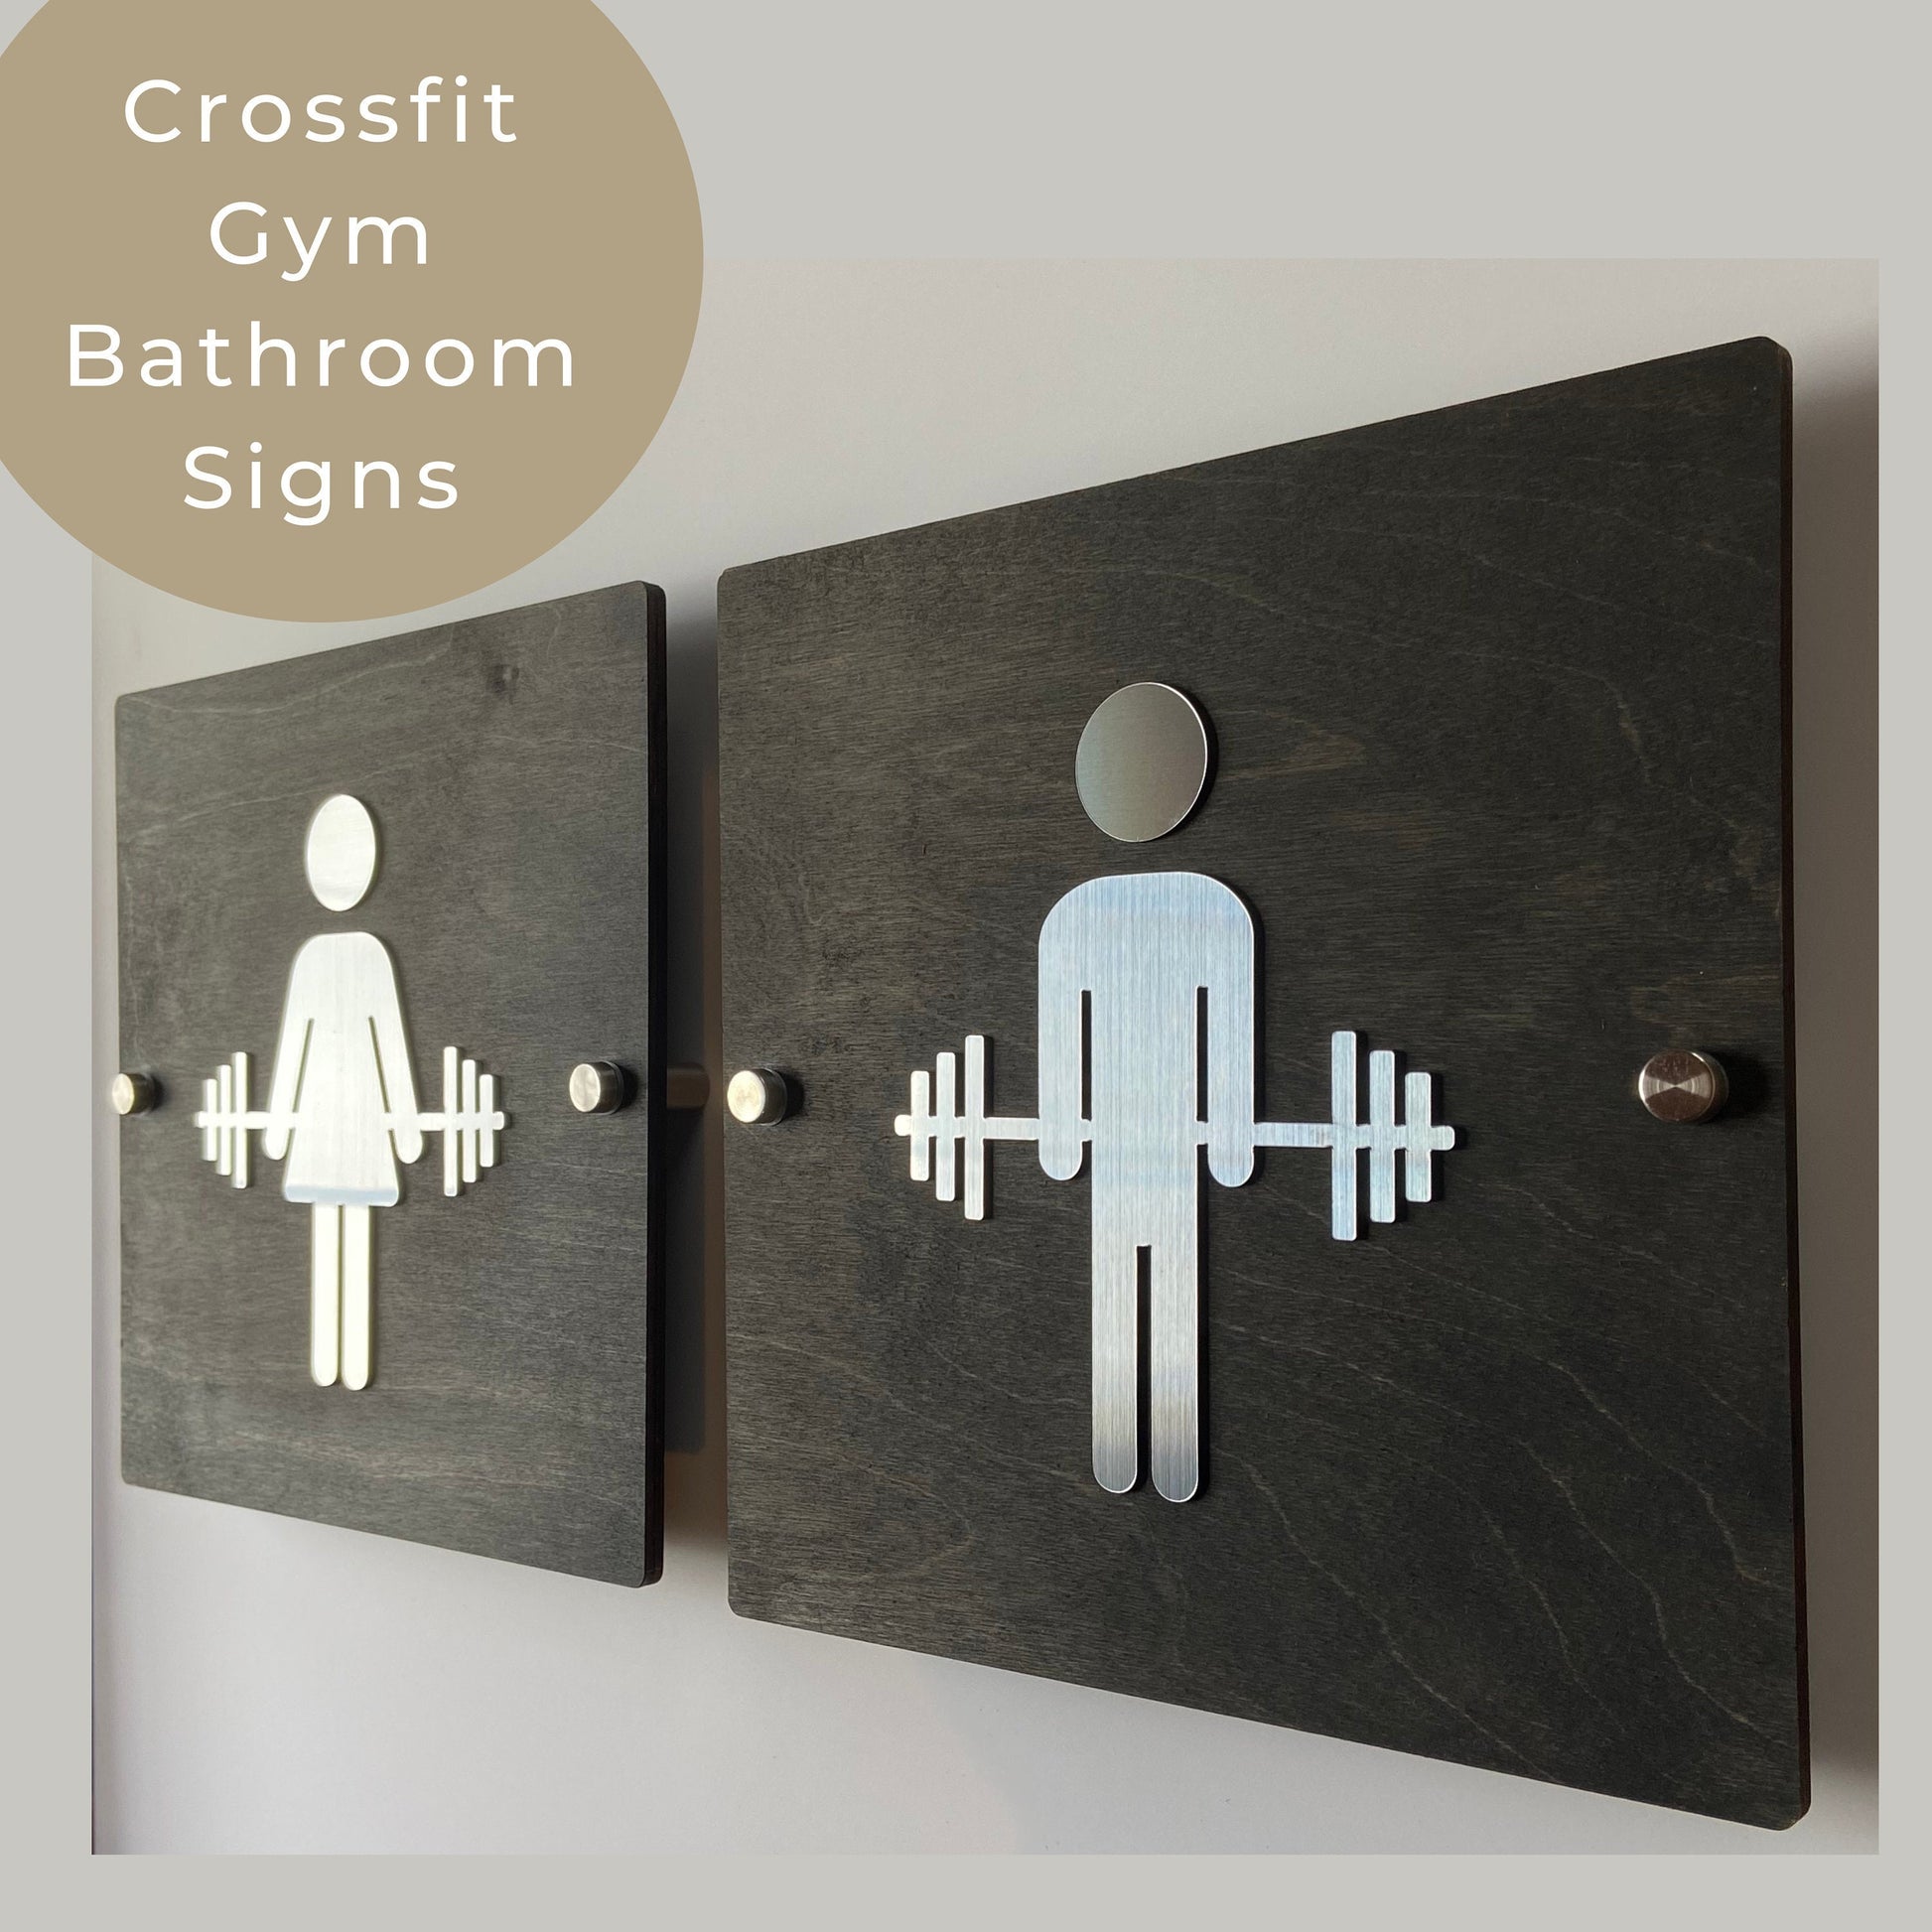 Crossfit Gym Bathroom Women Men Unisex Cycling Studio Restroom Signs Acrylic Rustic Wood 9 x 9 "| Priced per sign not as a set